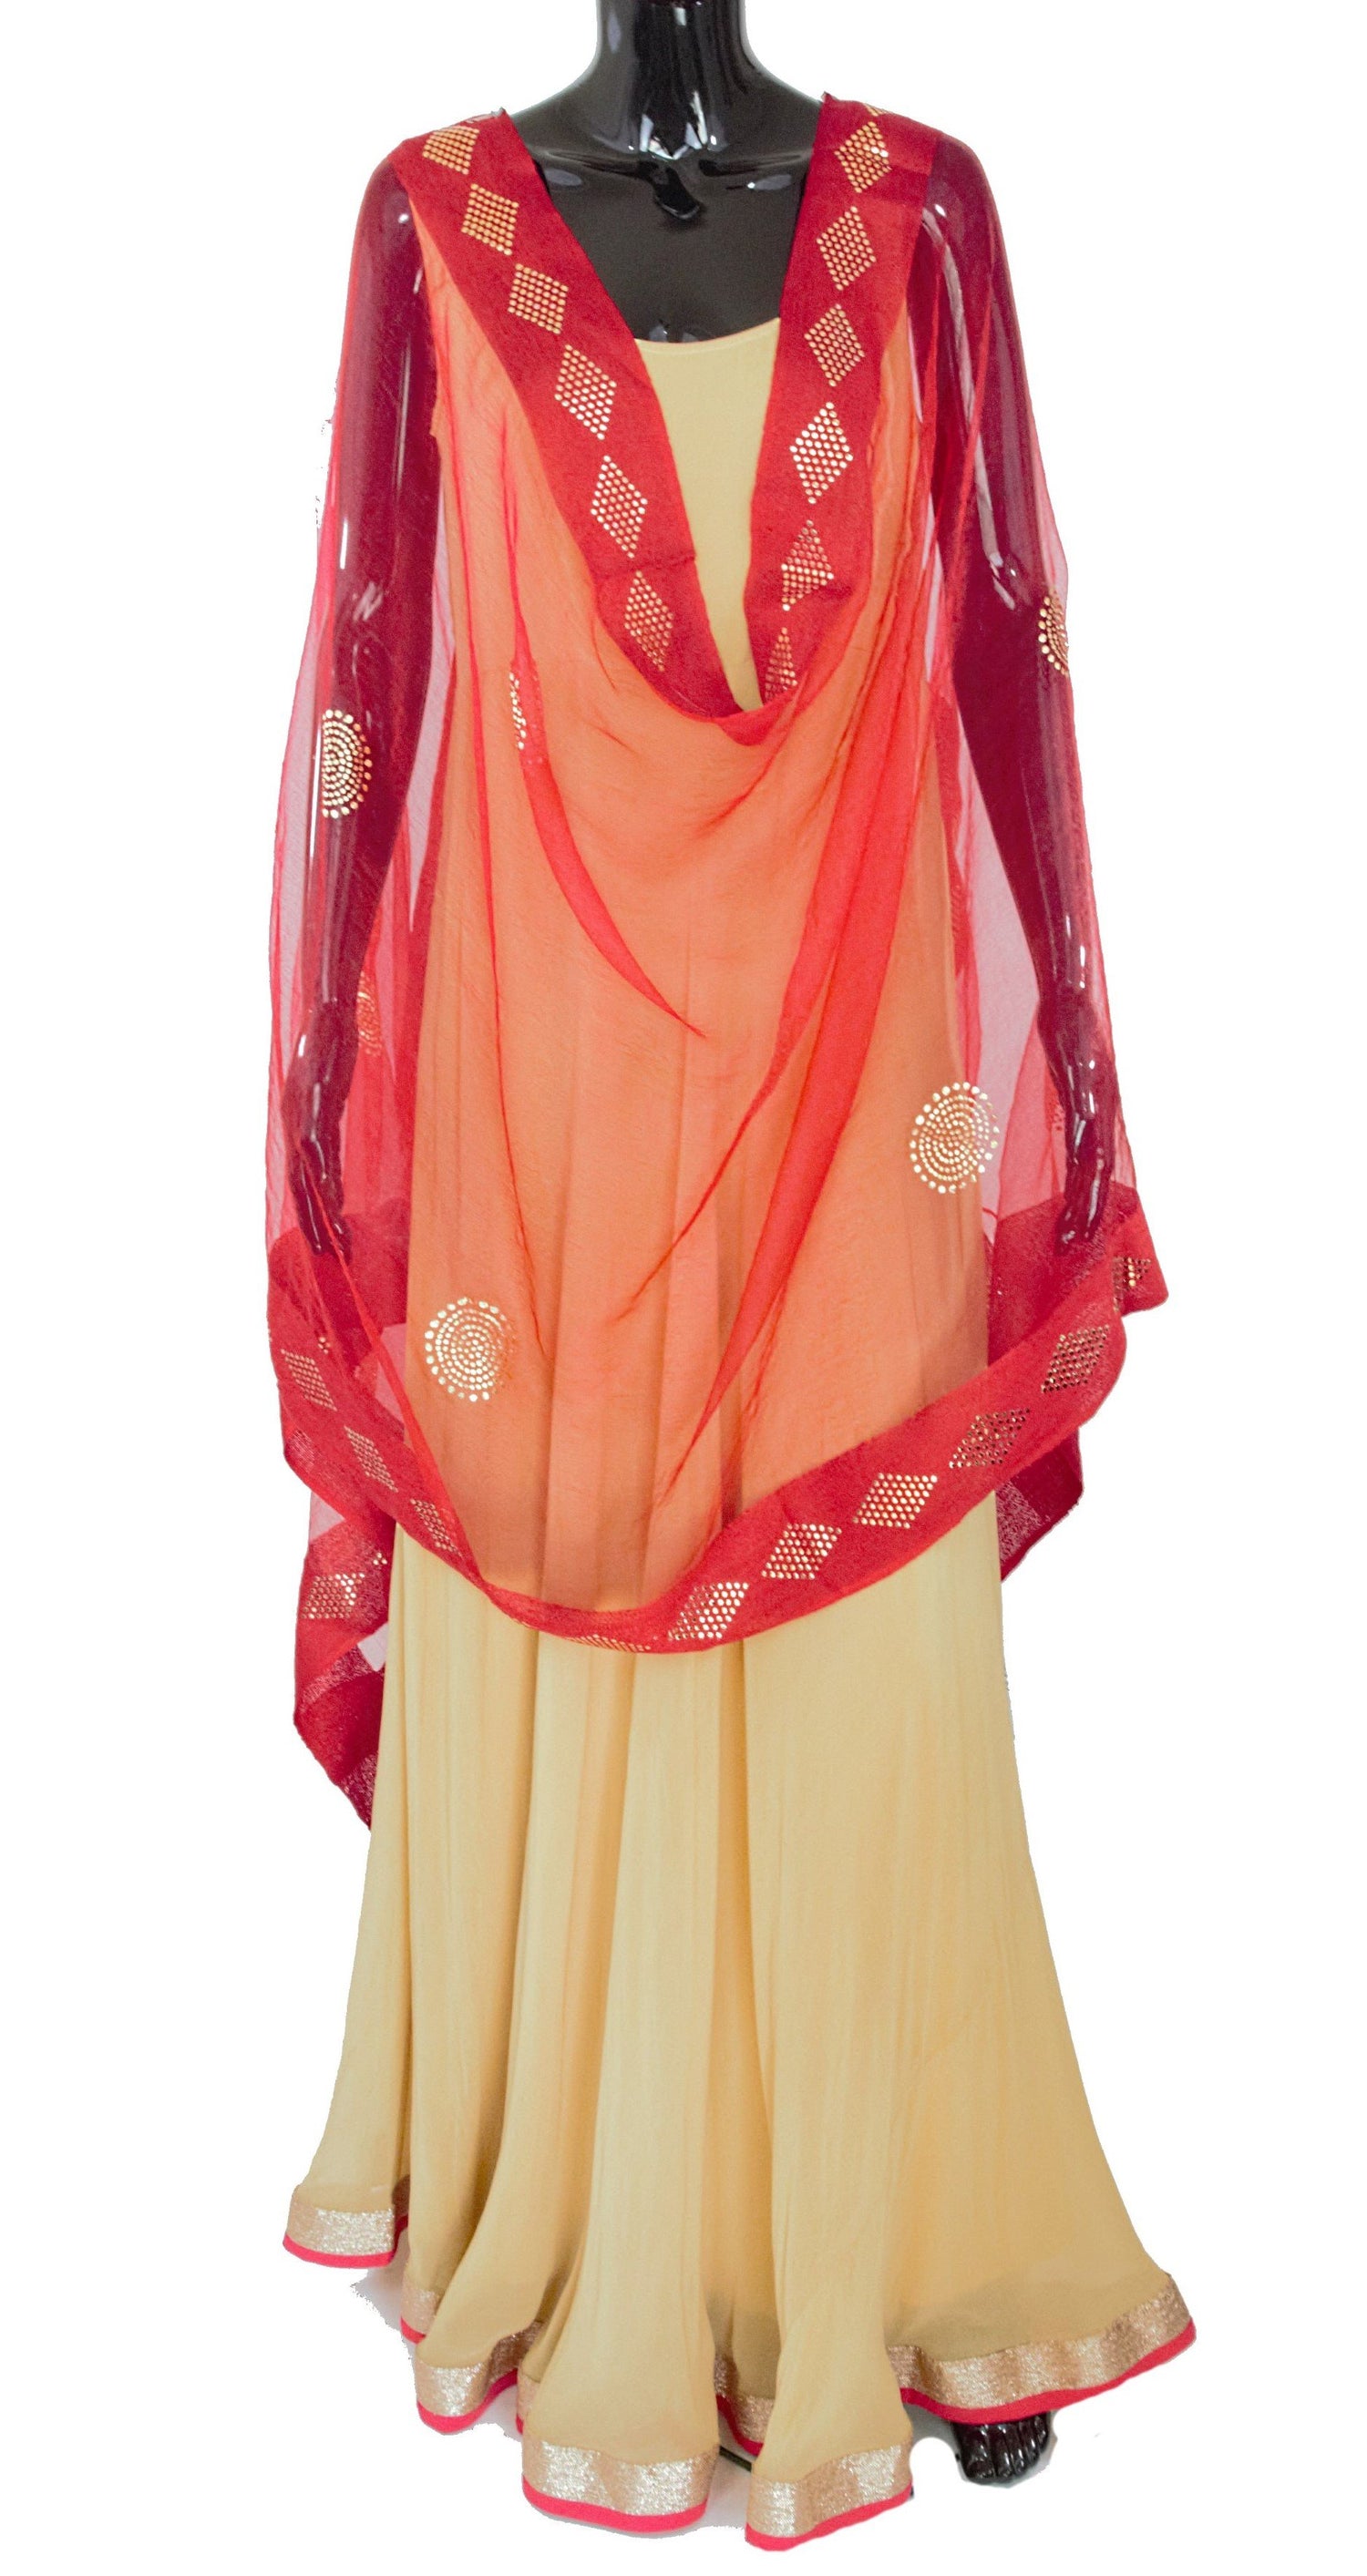 Red Color Dupatta With Golden Dots Pattern